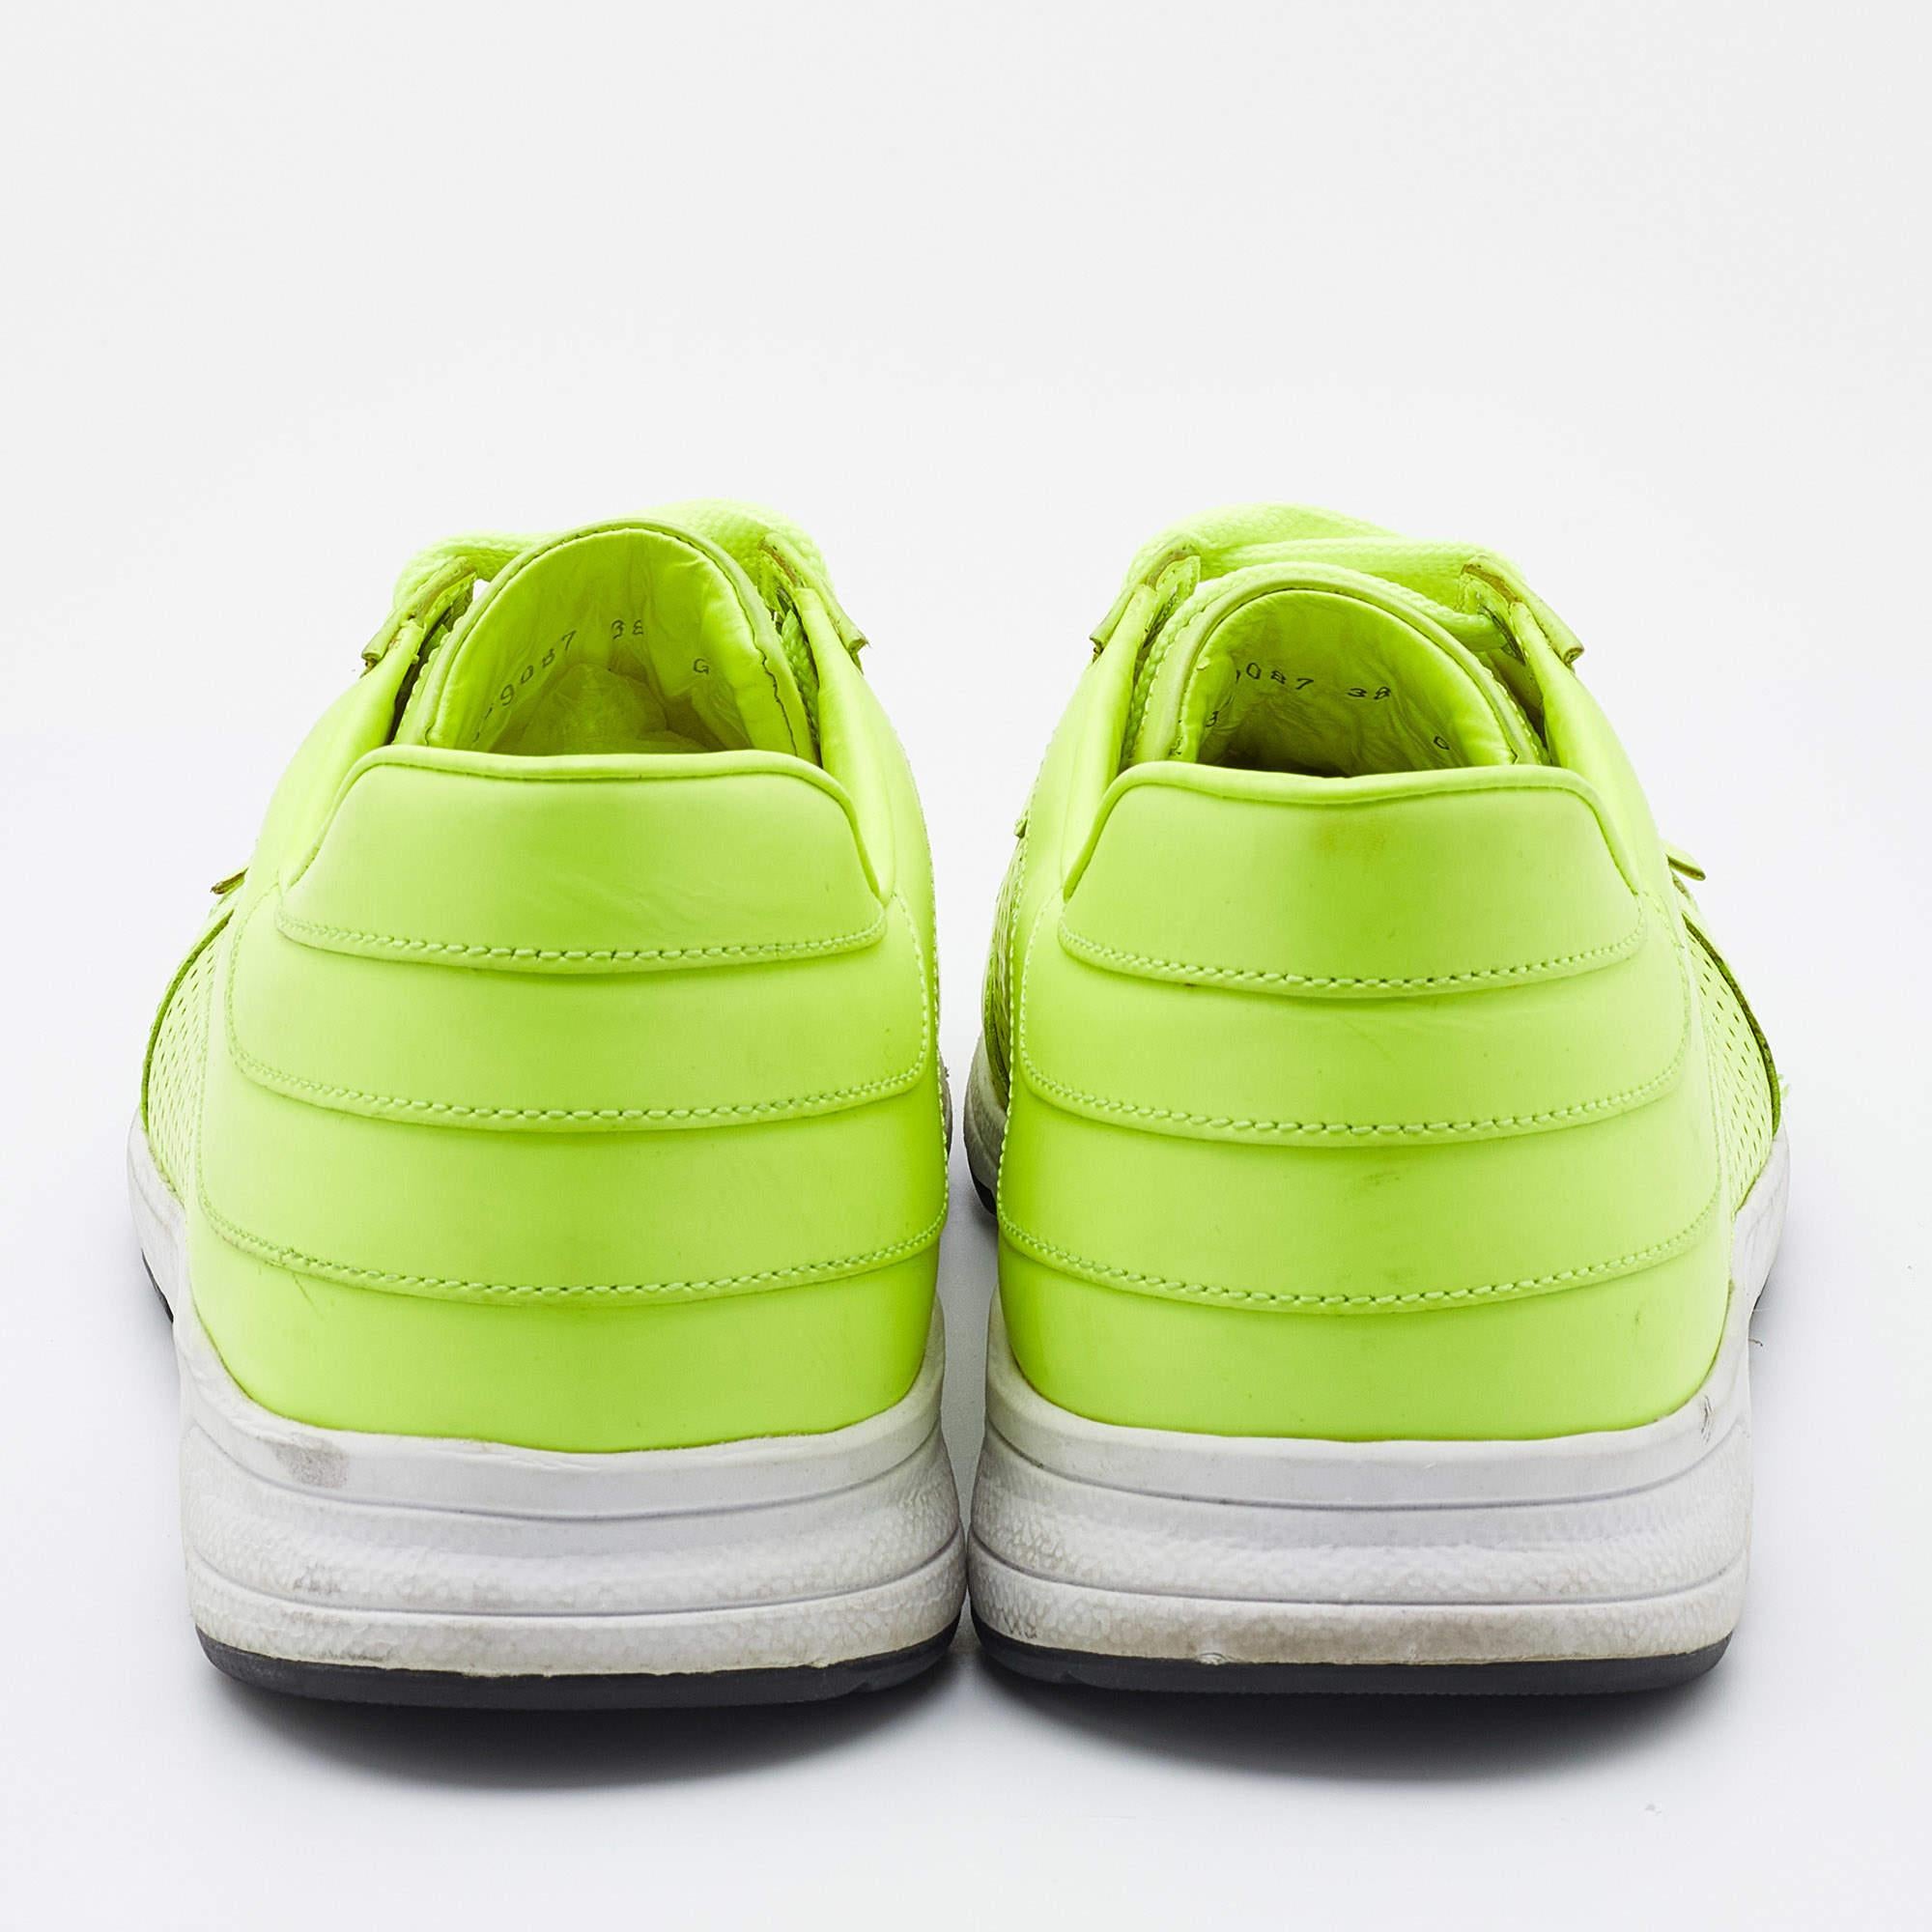 Women's Gucci Neon Green Perforated Leather Lace Up Sneakers Size 38 For Sale